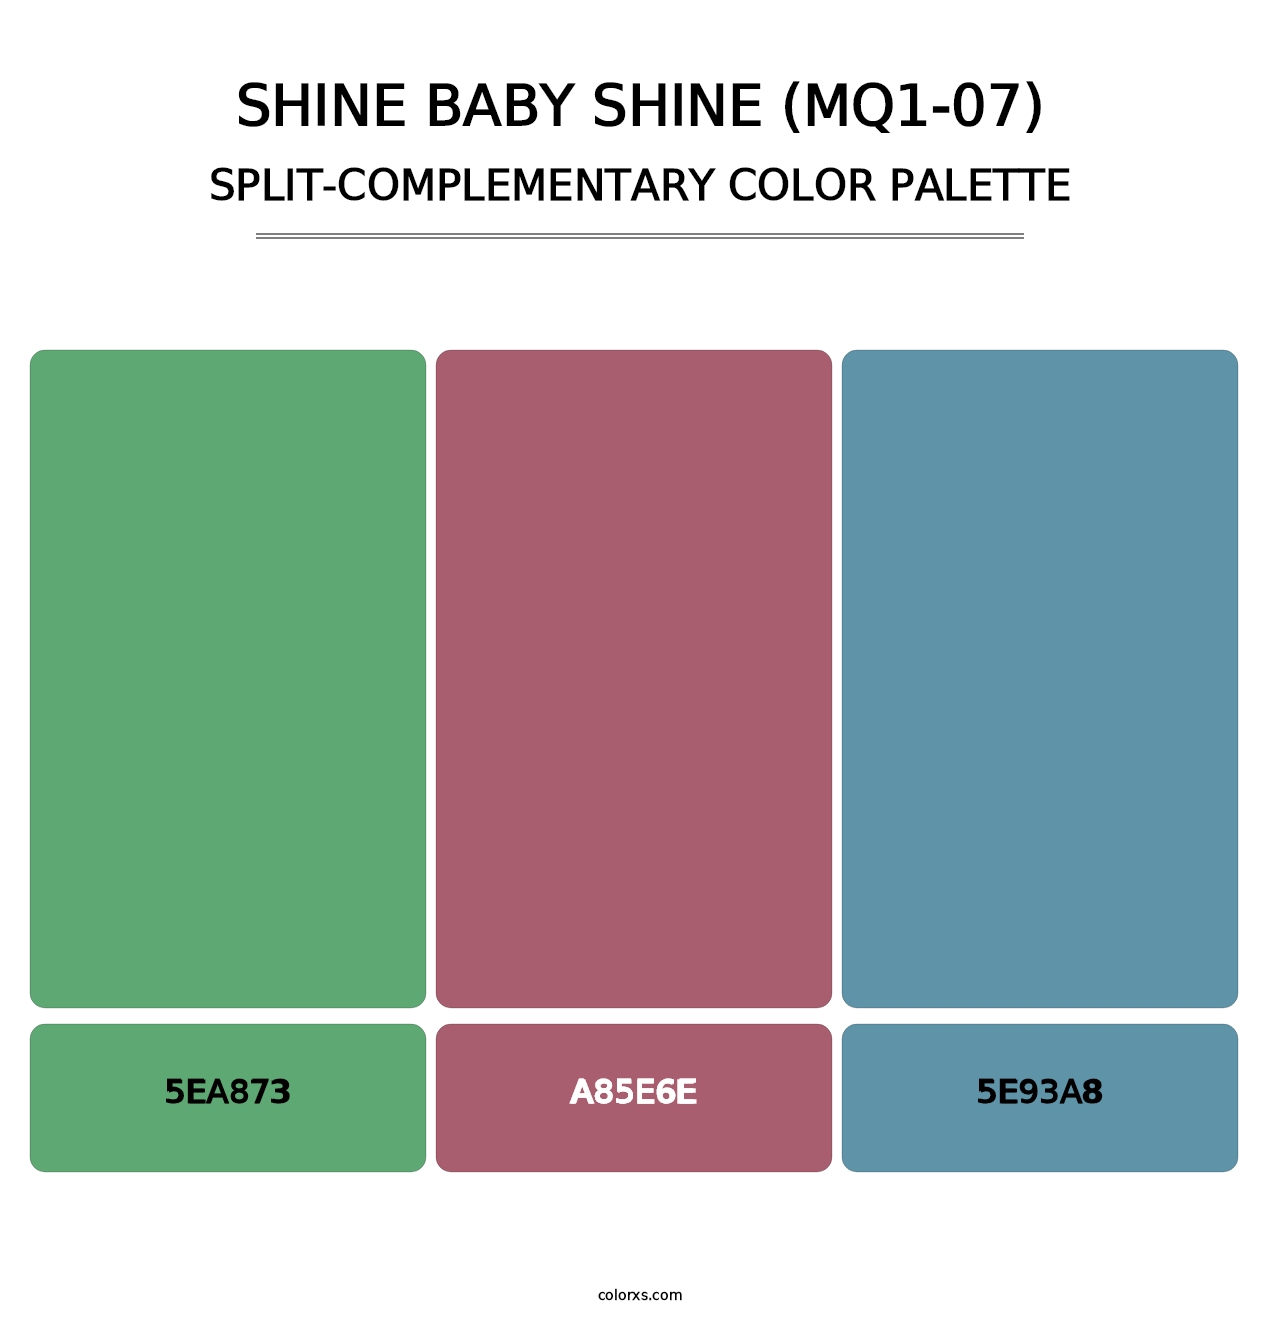 Shine Baby Shine (MQ1-07) - Split-Complementary Color Palette